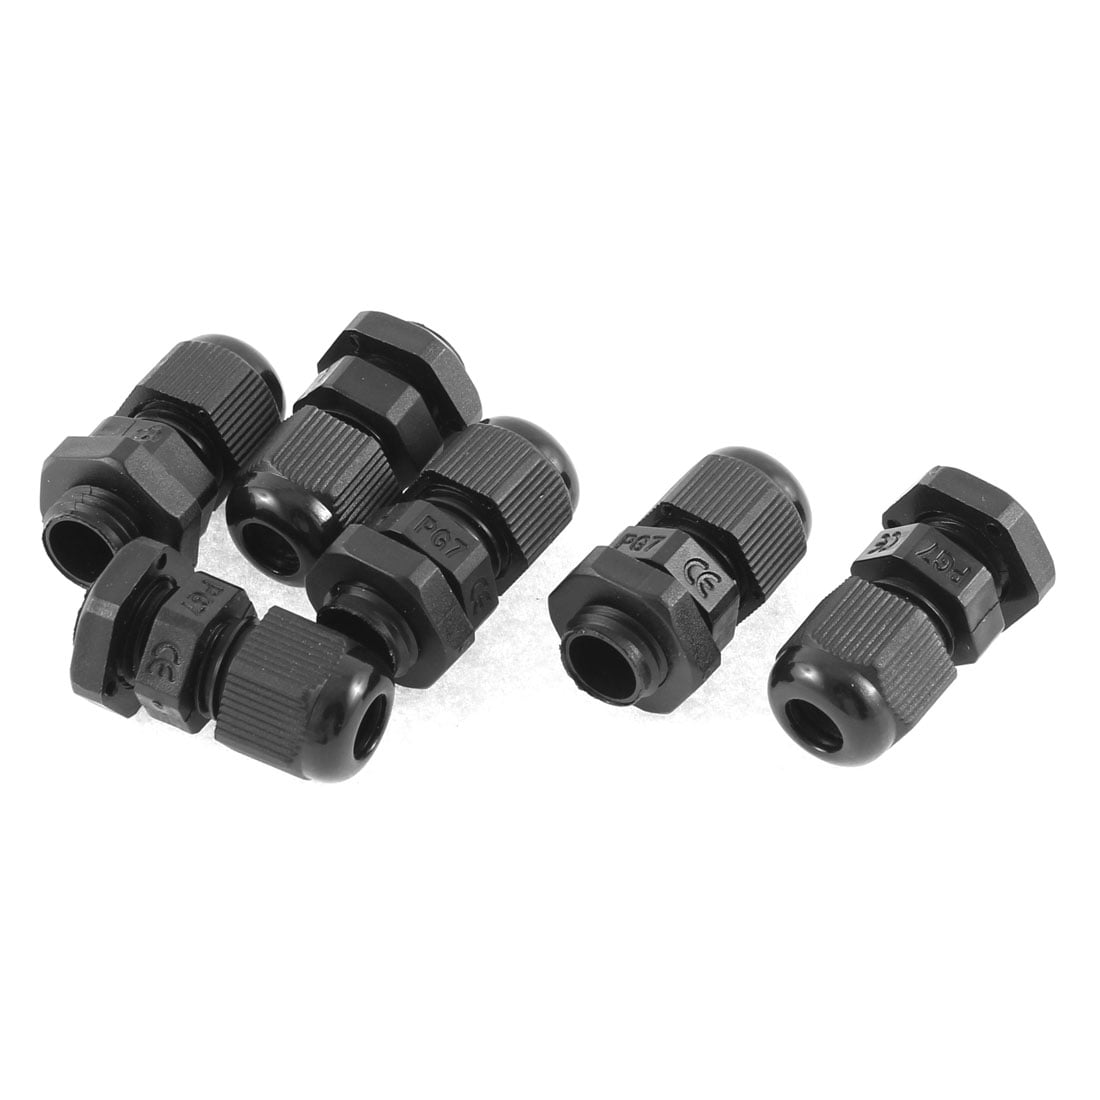 5PCS Waterproof Fixing Gland Connector PG7 for 3.5-6mm Dia Cable Wire NEW